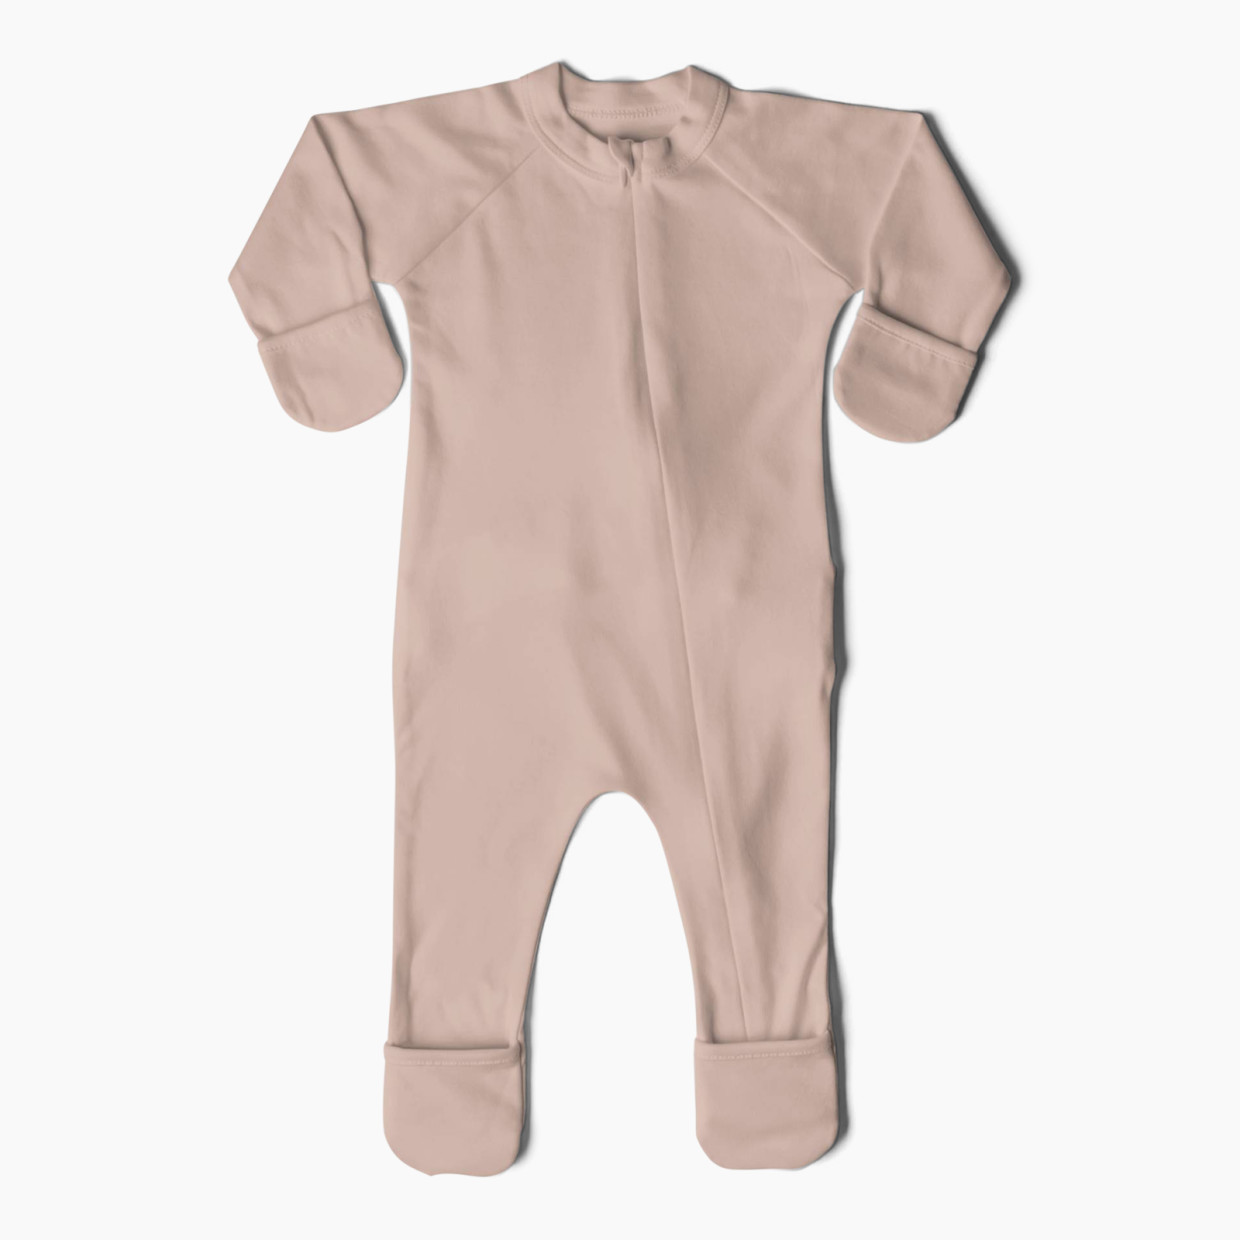 Goumi Kids Grow With You Footie - Loose Fit - Rose, 0-3 M.